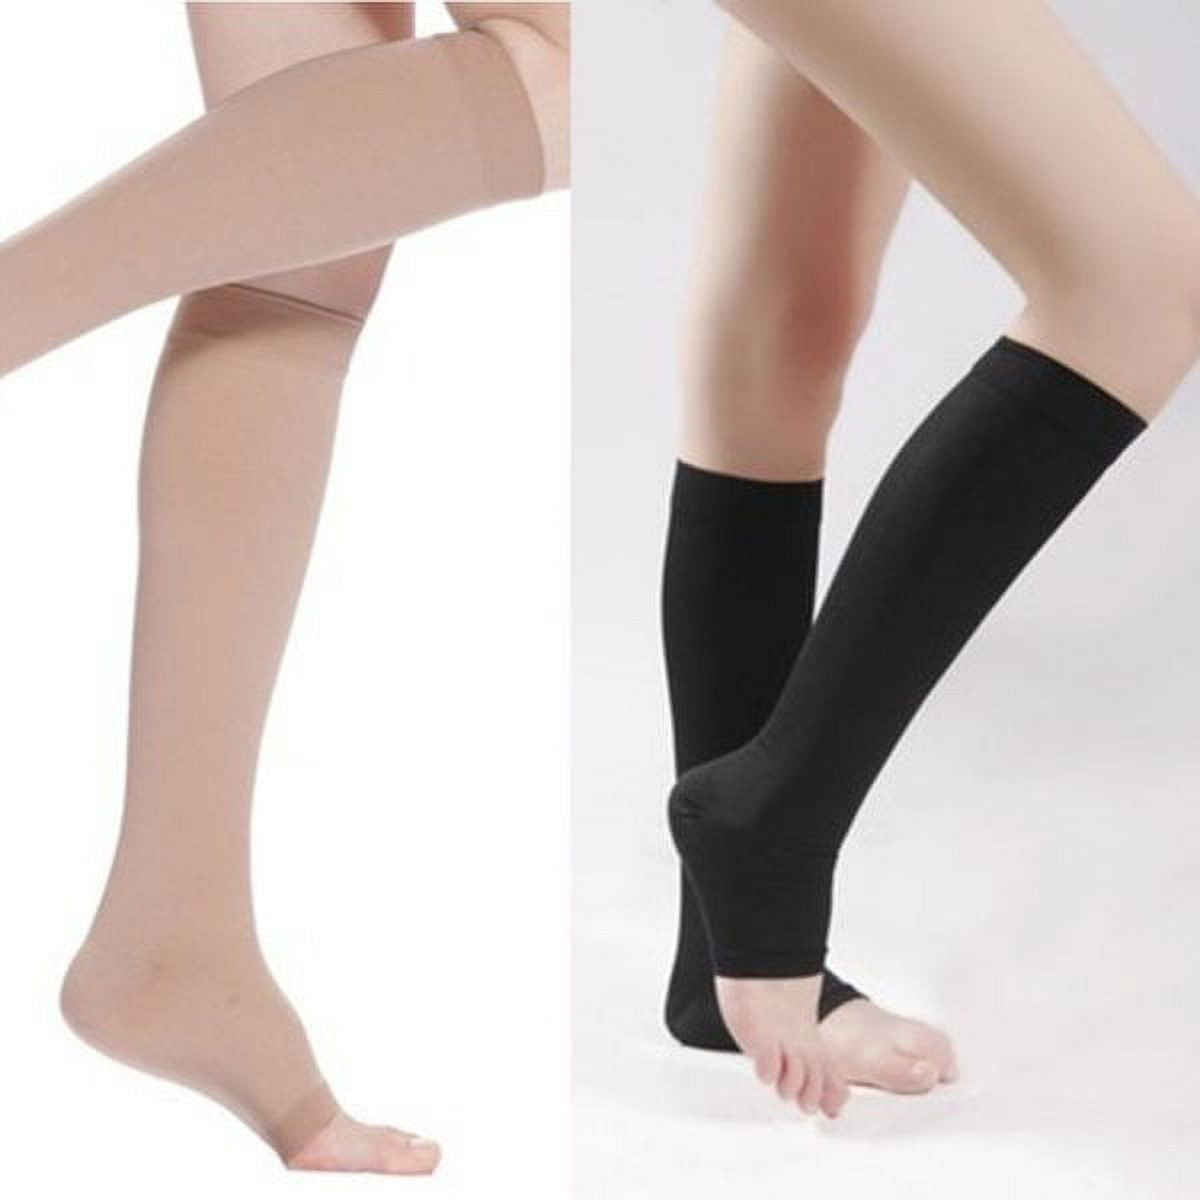 2 Pack Compression Socks, Open Toe, 18-21 mm Hg Graduated Compression  Stockings for Men Women, Knee High Compression Sleeves for DVT, Maternity,  Pregnancy, Varicose Veins, Relief Shin Splints 